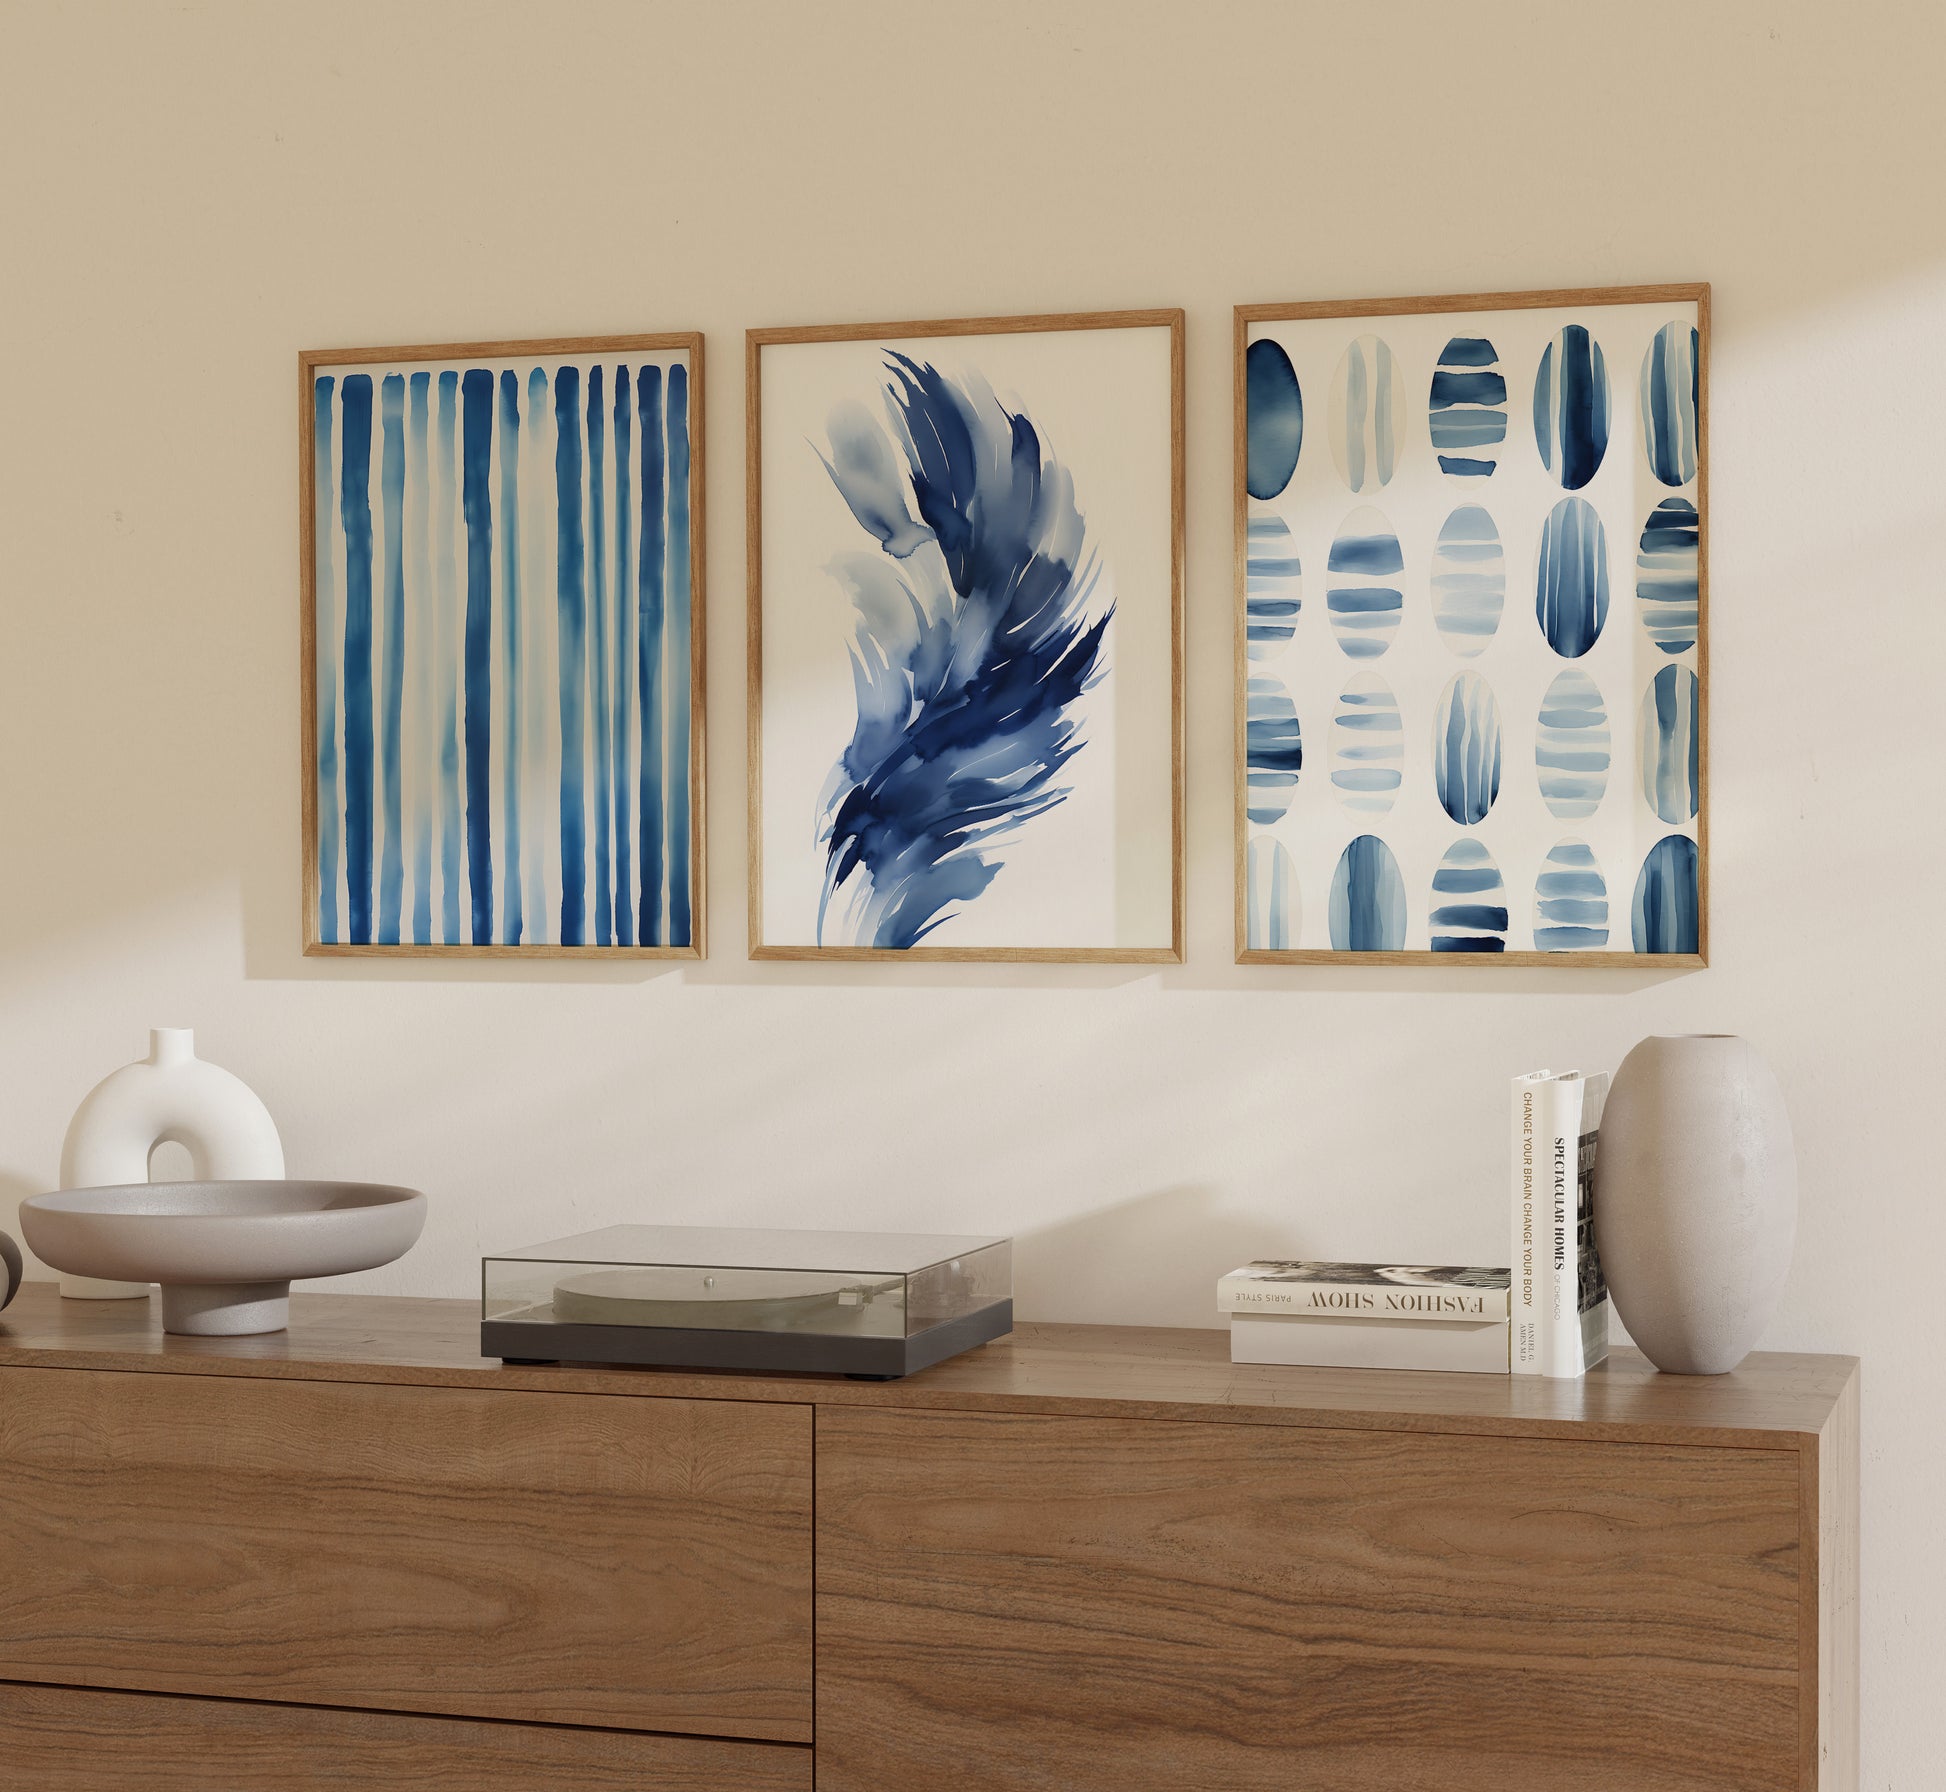 Three abstract paintings in blue tones on a beige wall above a wooden sideboard with decorative items.